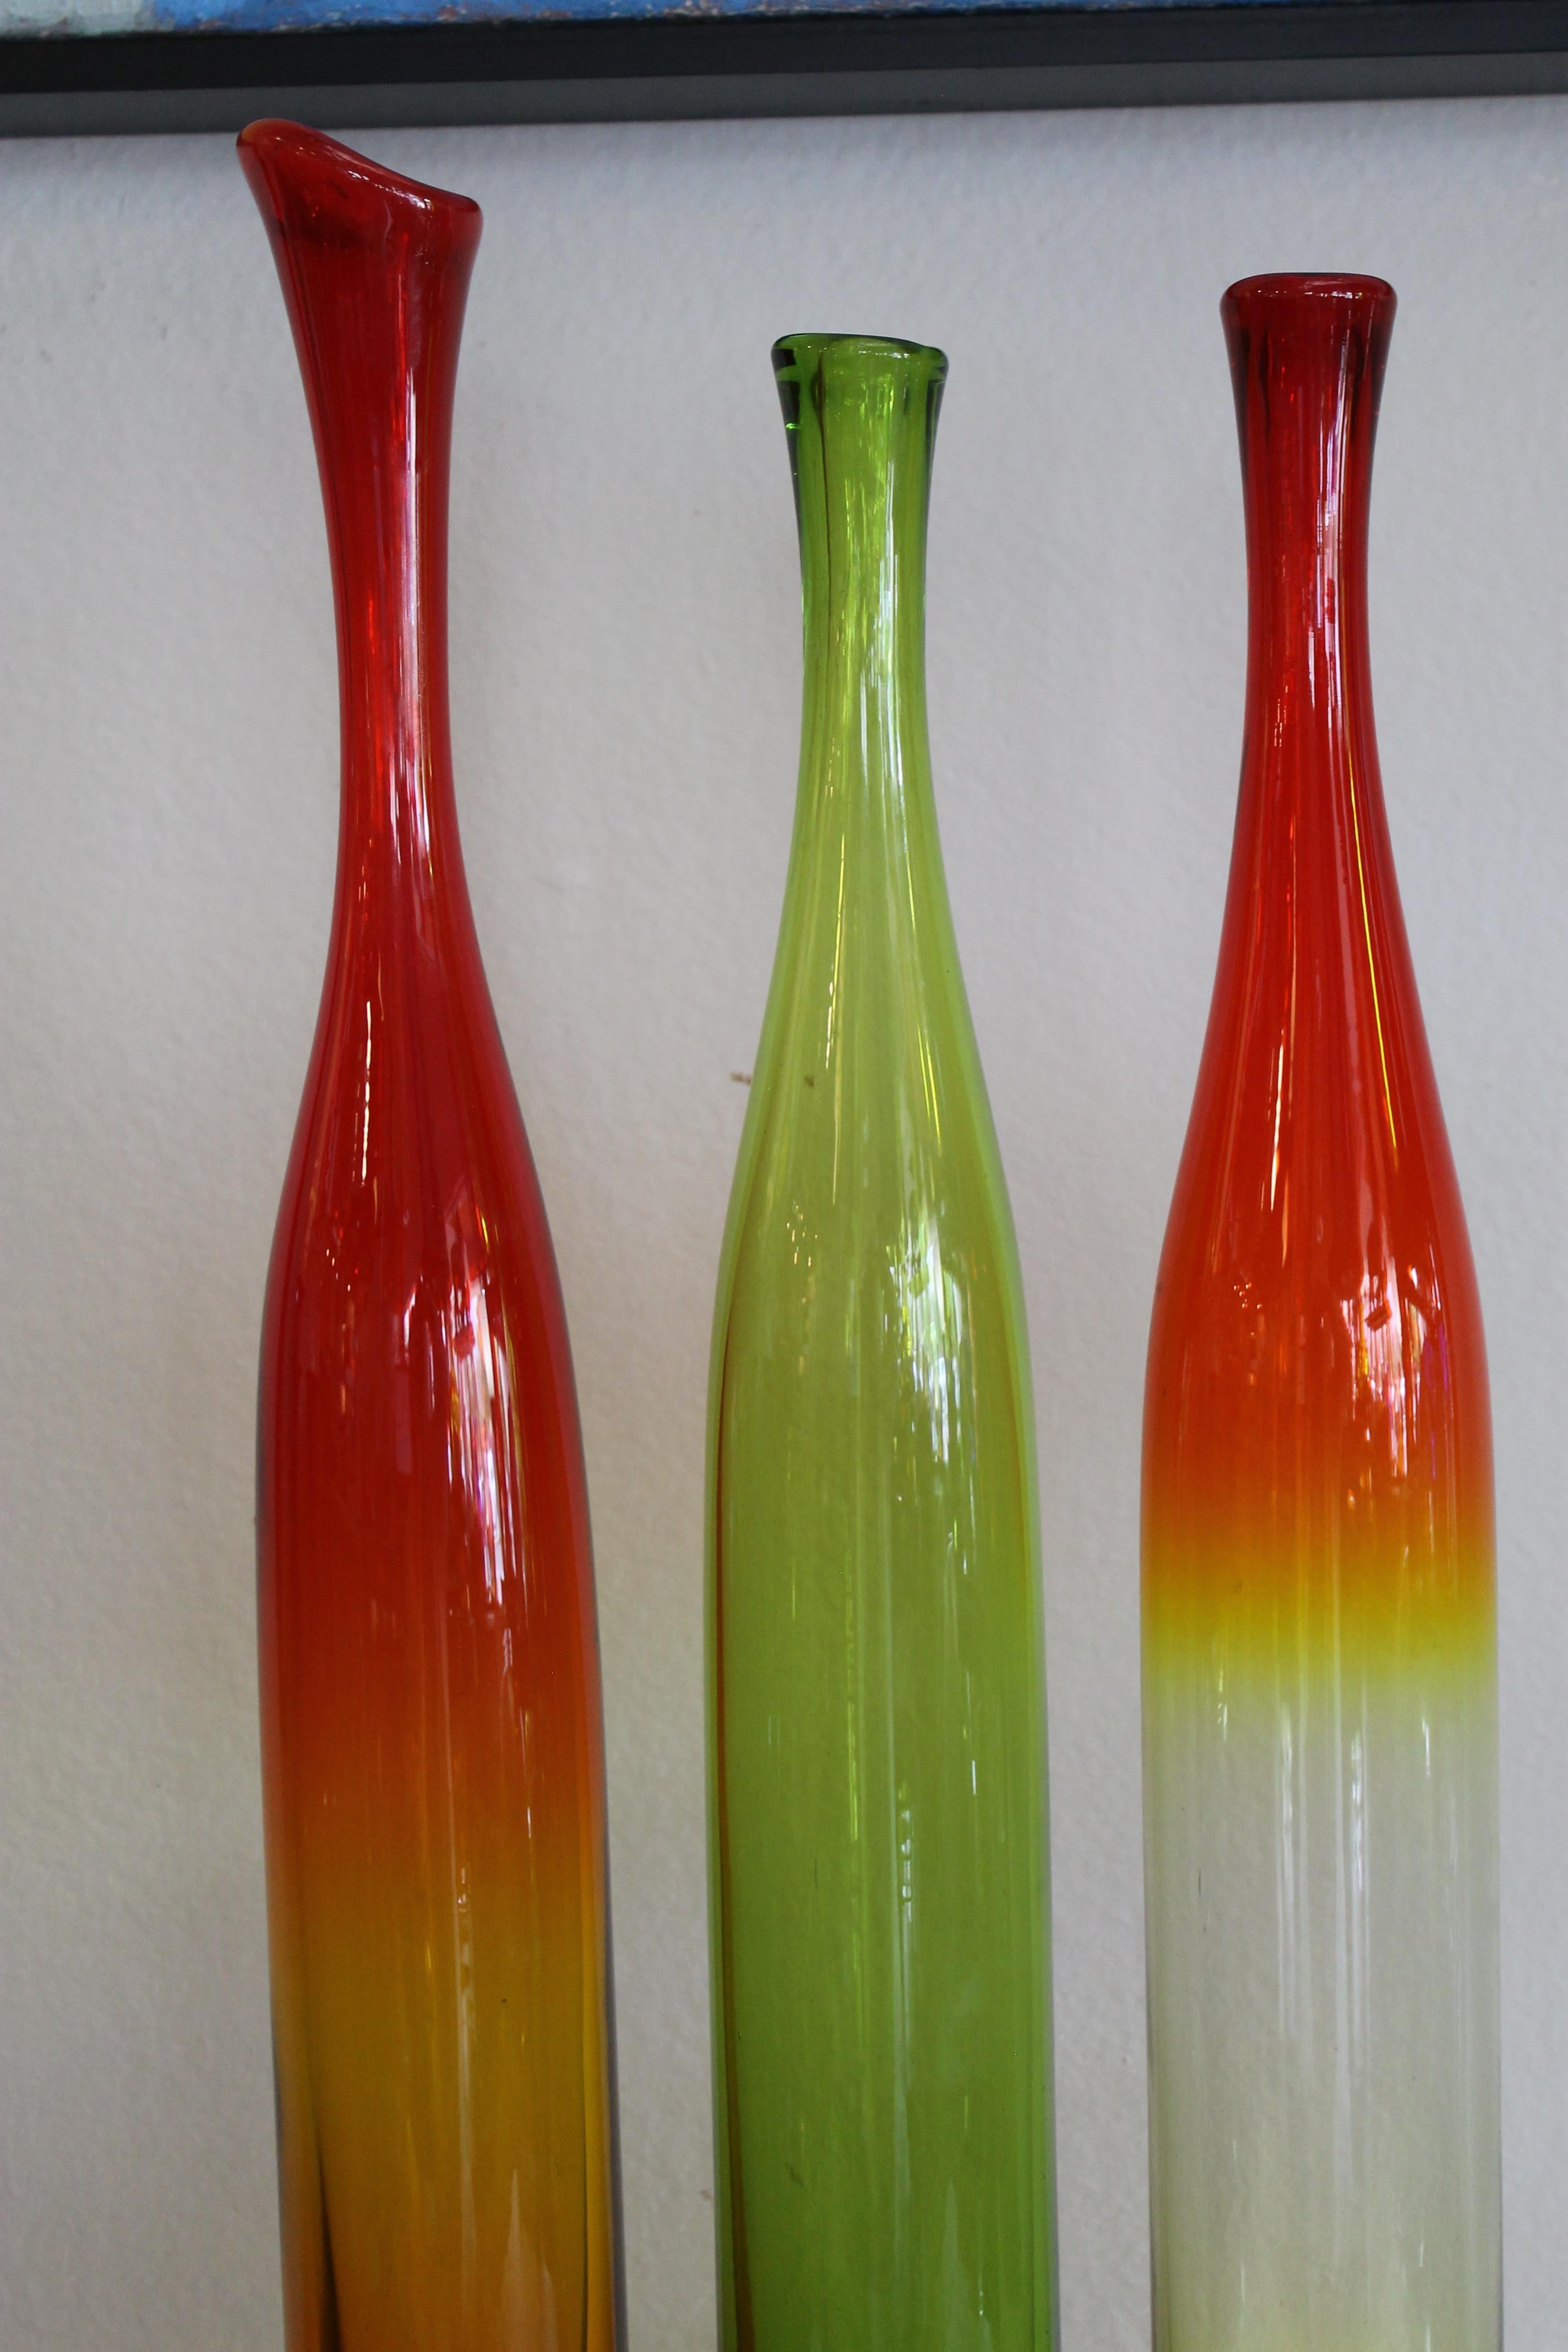 Three Joel Myers colored glass vases, model no. 6427, 1960s. Manufactured by Blenko. The tallest vase is 23.5